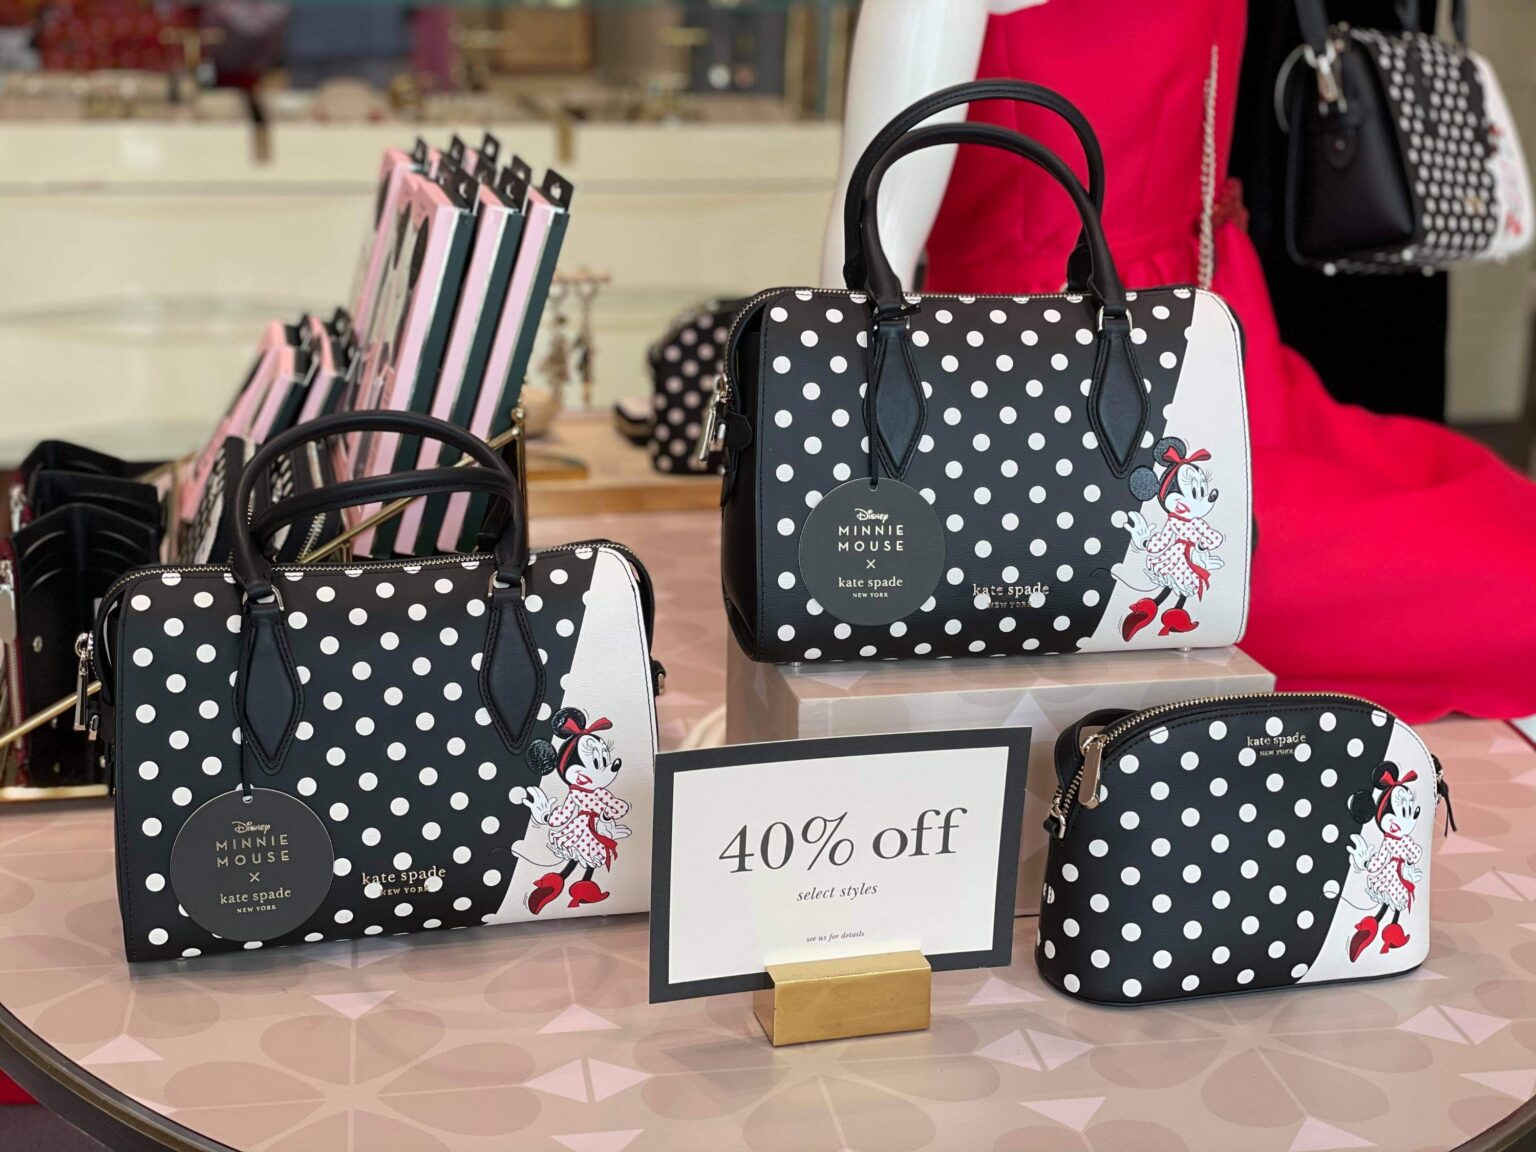 Stay Stylish With The Newest Minnie Mouse x Kate Spade Collection